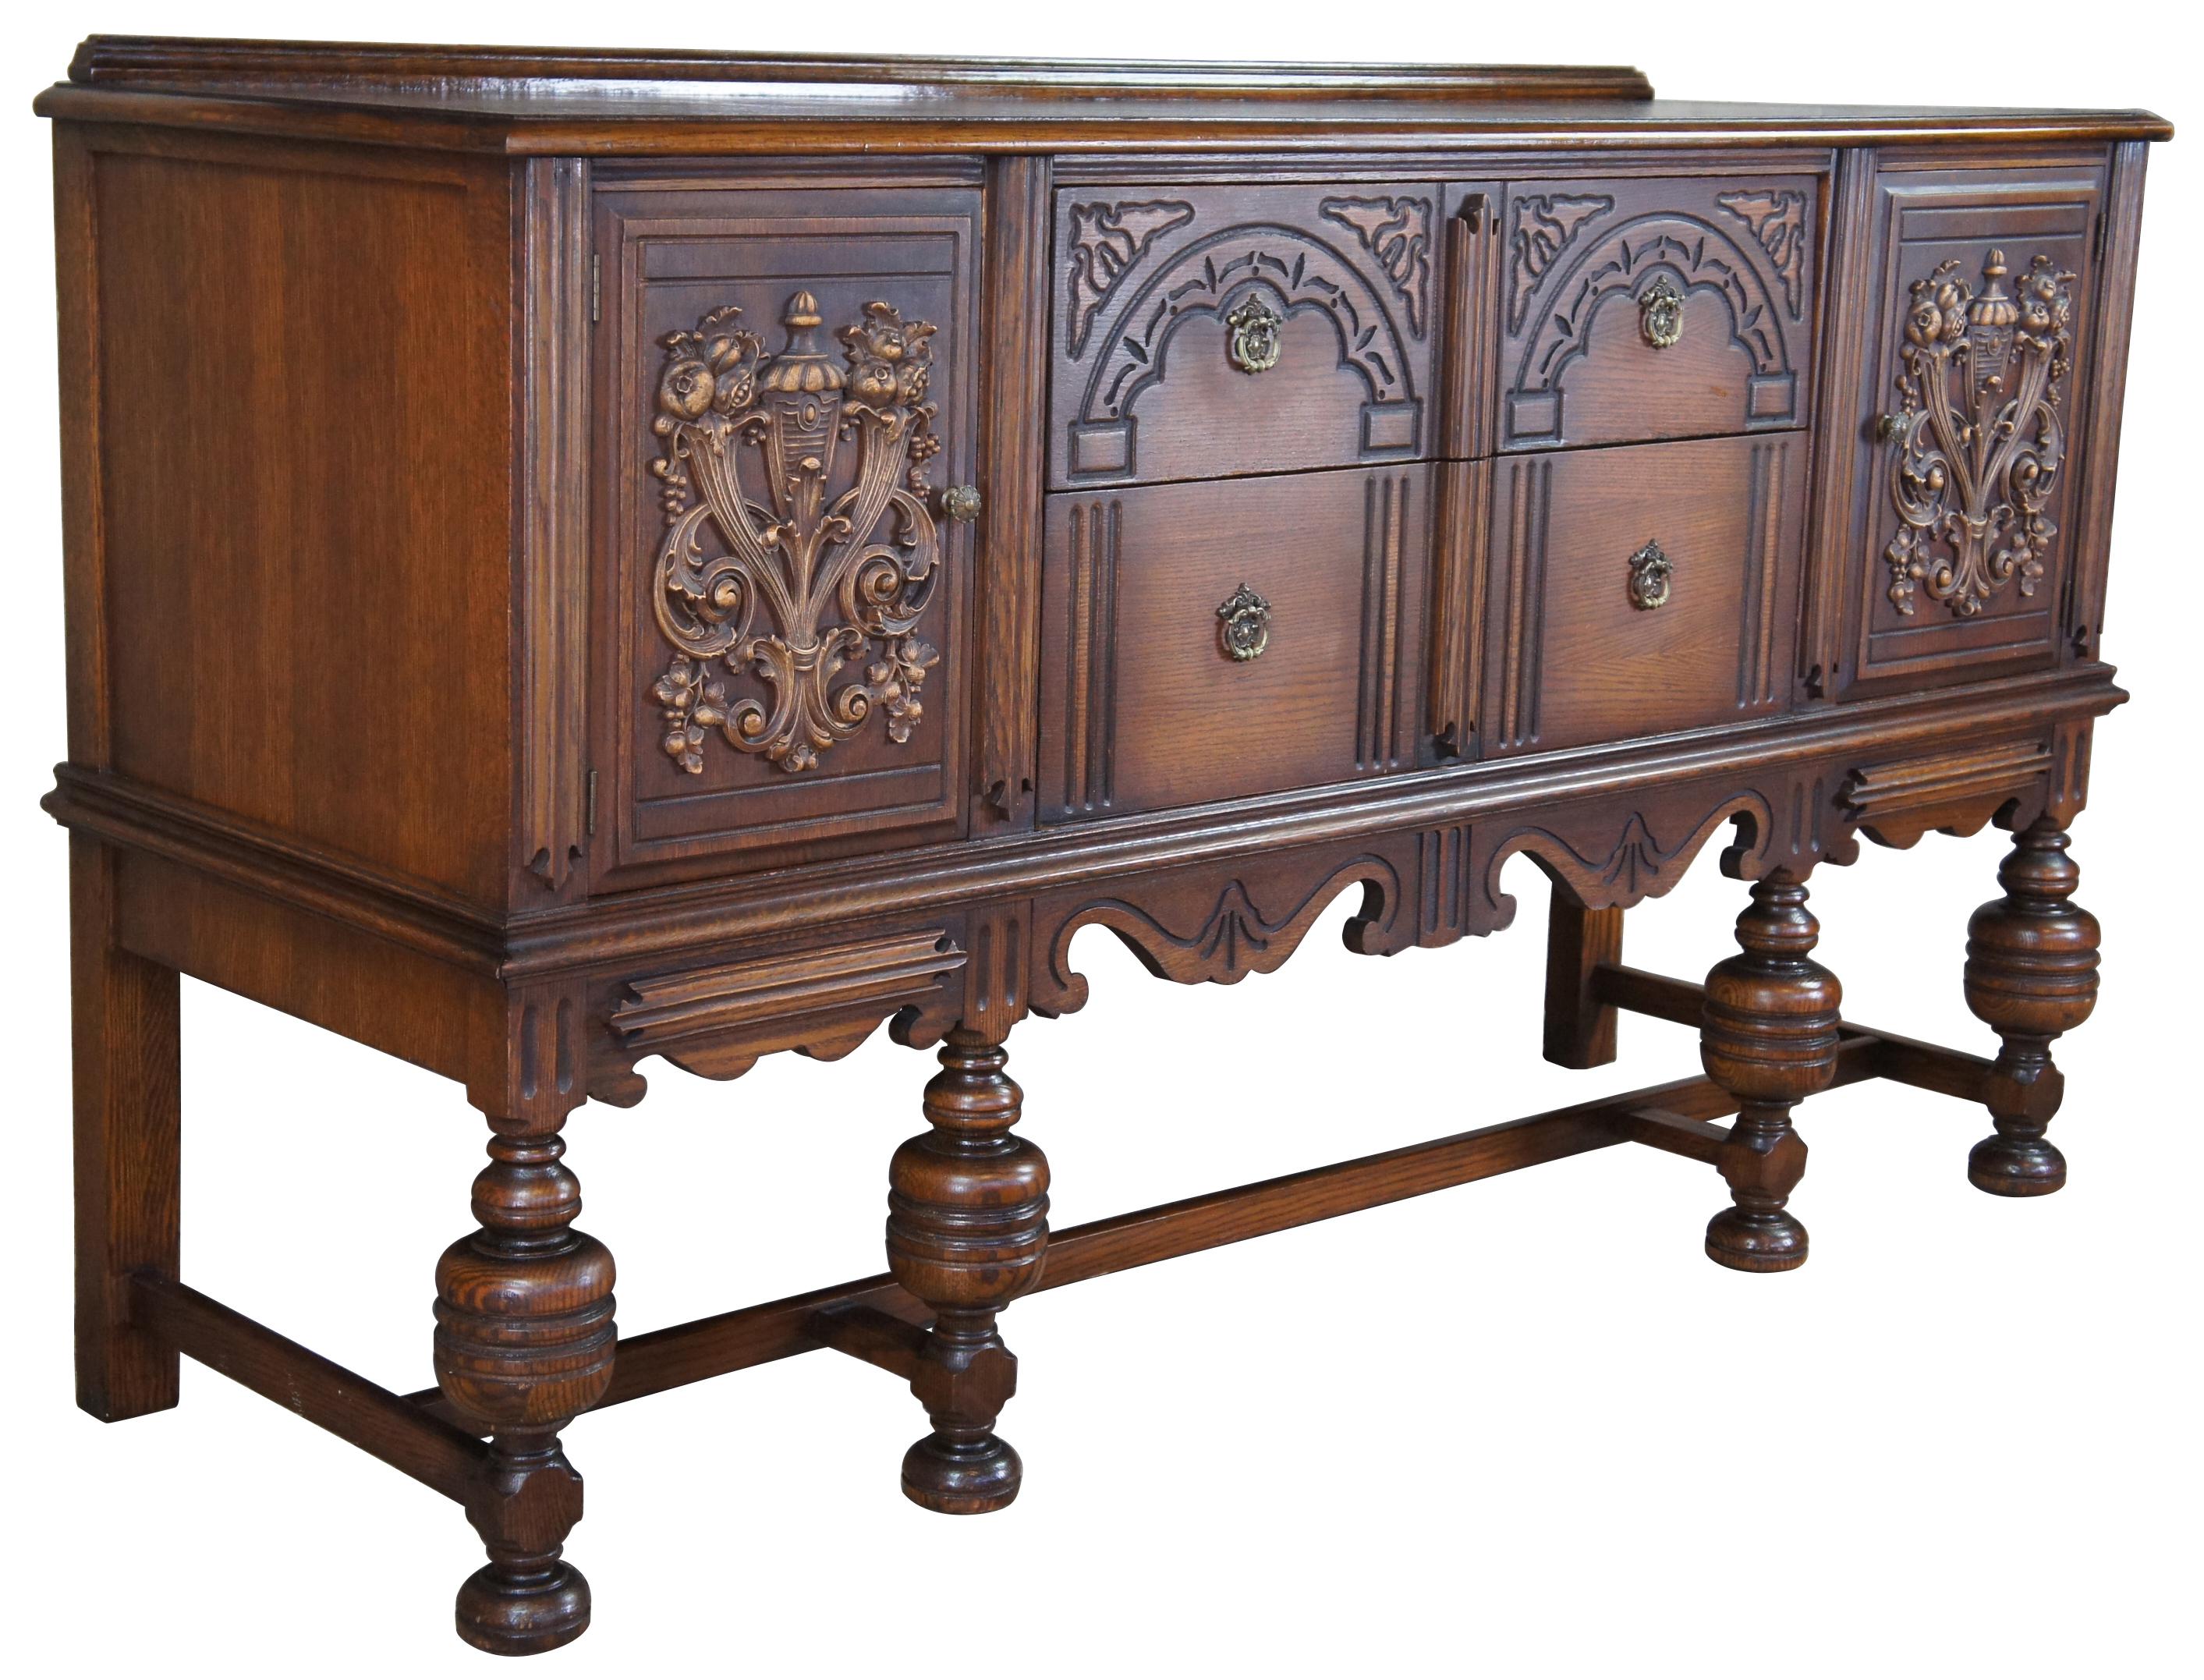 Early 20th century Jacobean / Elizabethan revival buffet or server by Basic Furniture Company out of Waynesboro, Virginia. Made from oak with two drawers between two cabinets supported over carved serpentine apron over turned baluster supports and